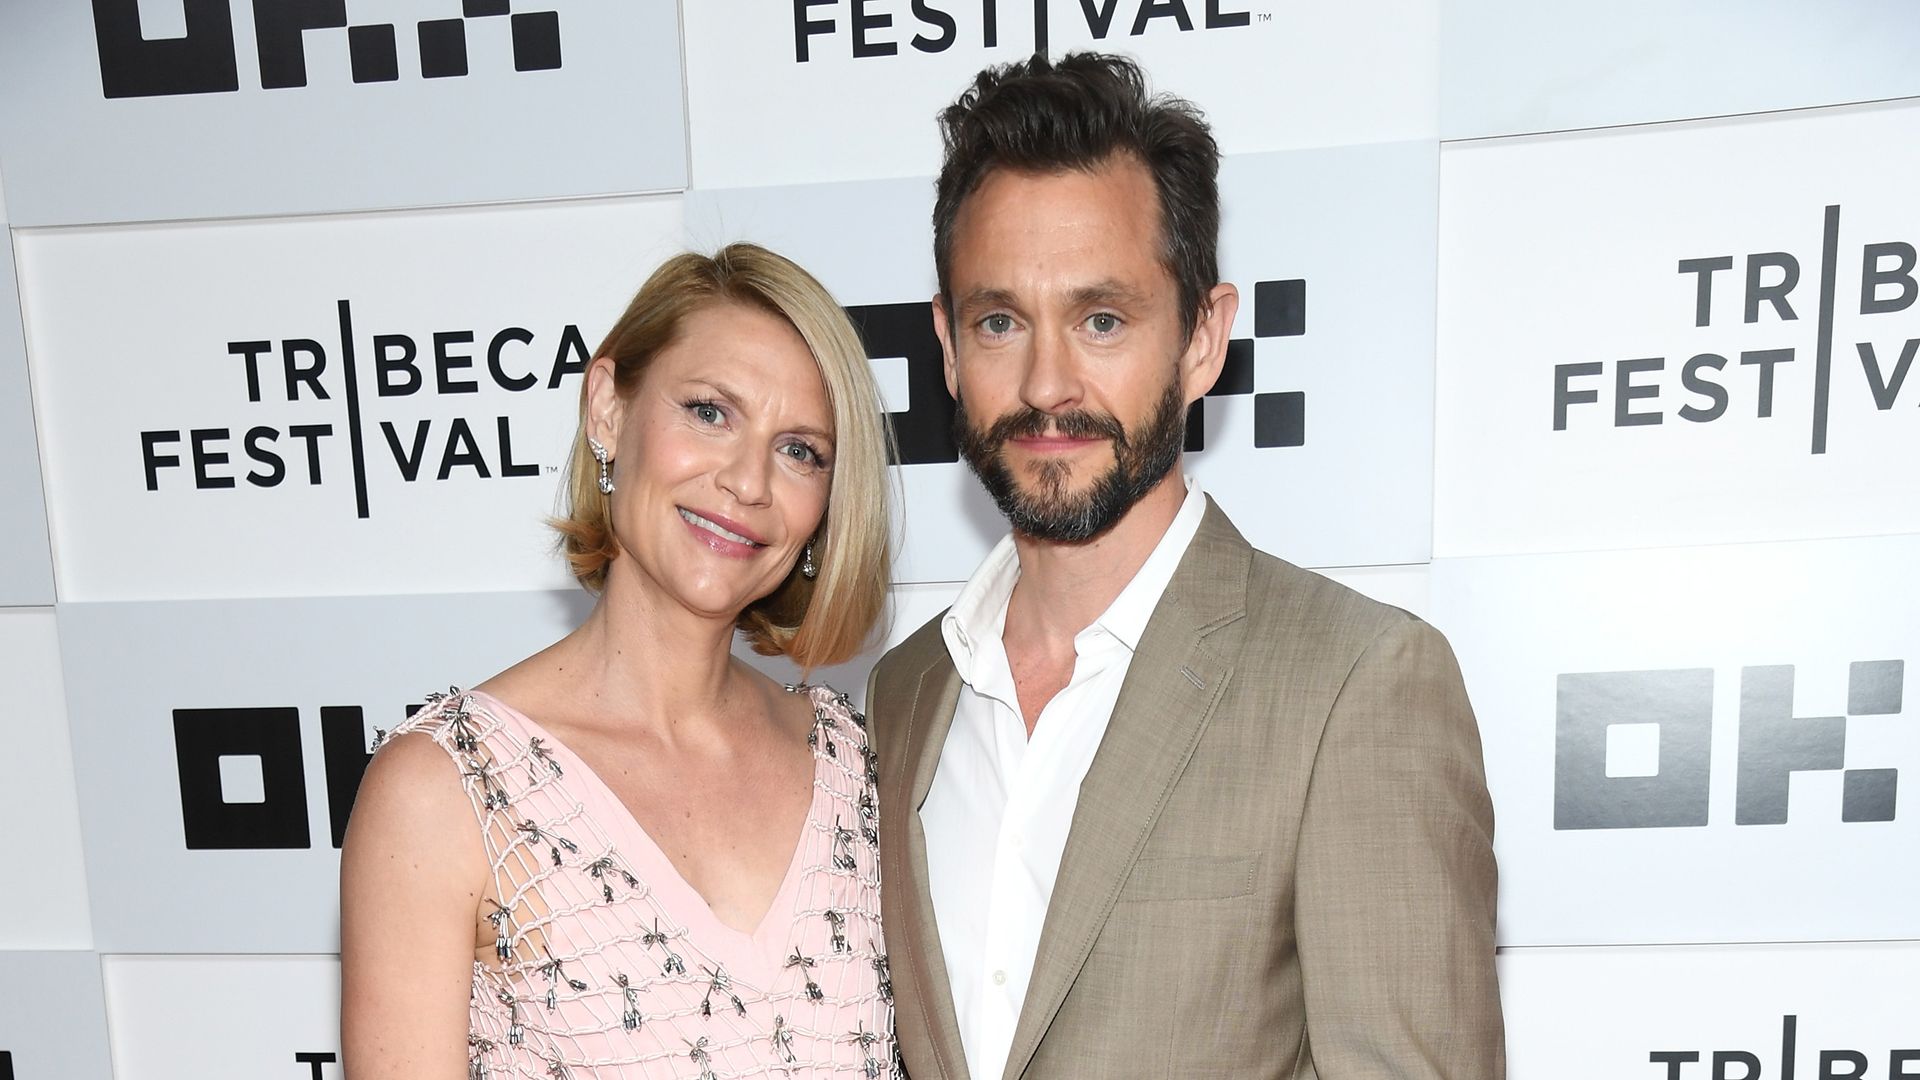 Claire Danes and Hugh Dancy attend the screening of "Full Circle" during the 2023 Tribeca Festival at BMCC Tribeca PAC on June 11, 2023 in New York City